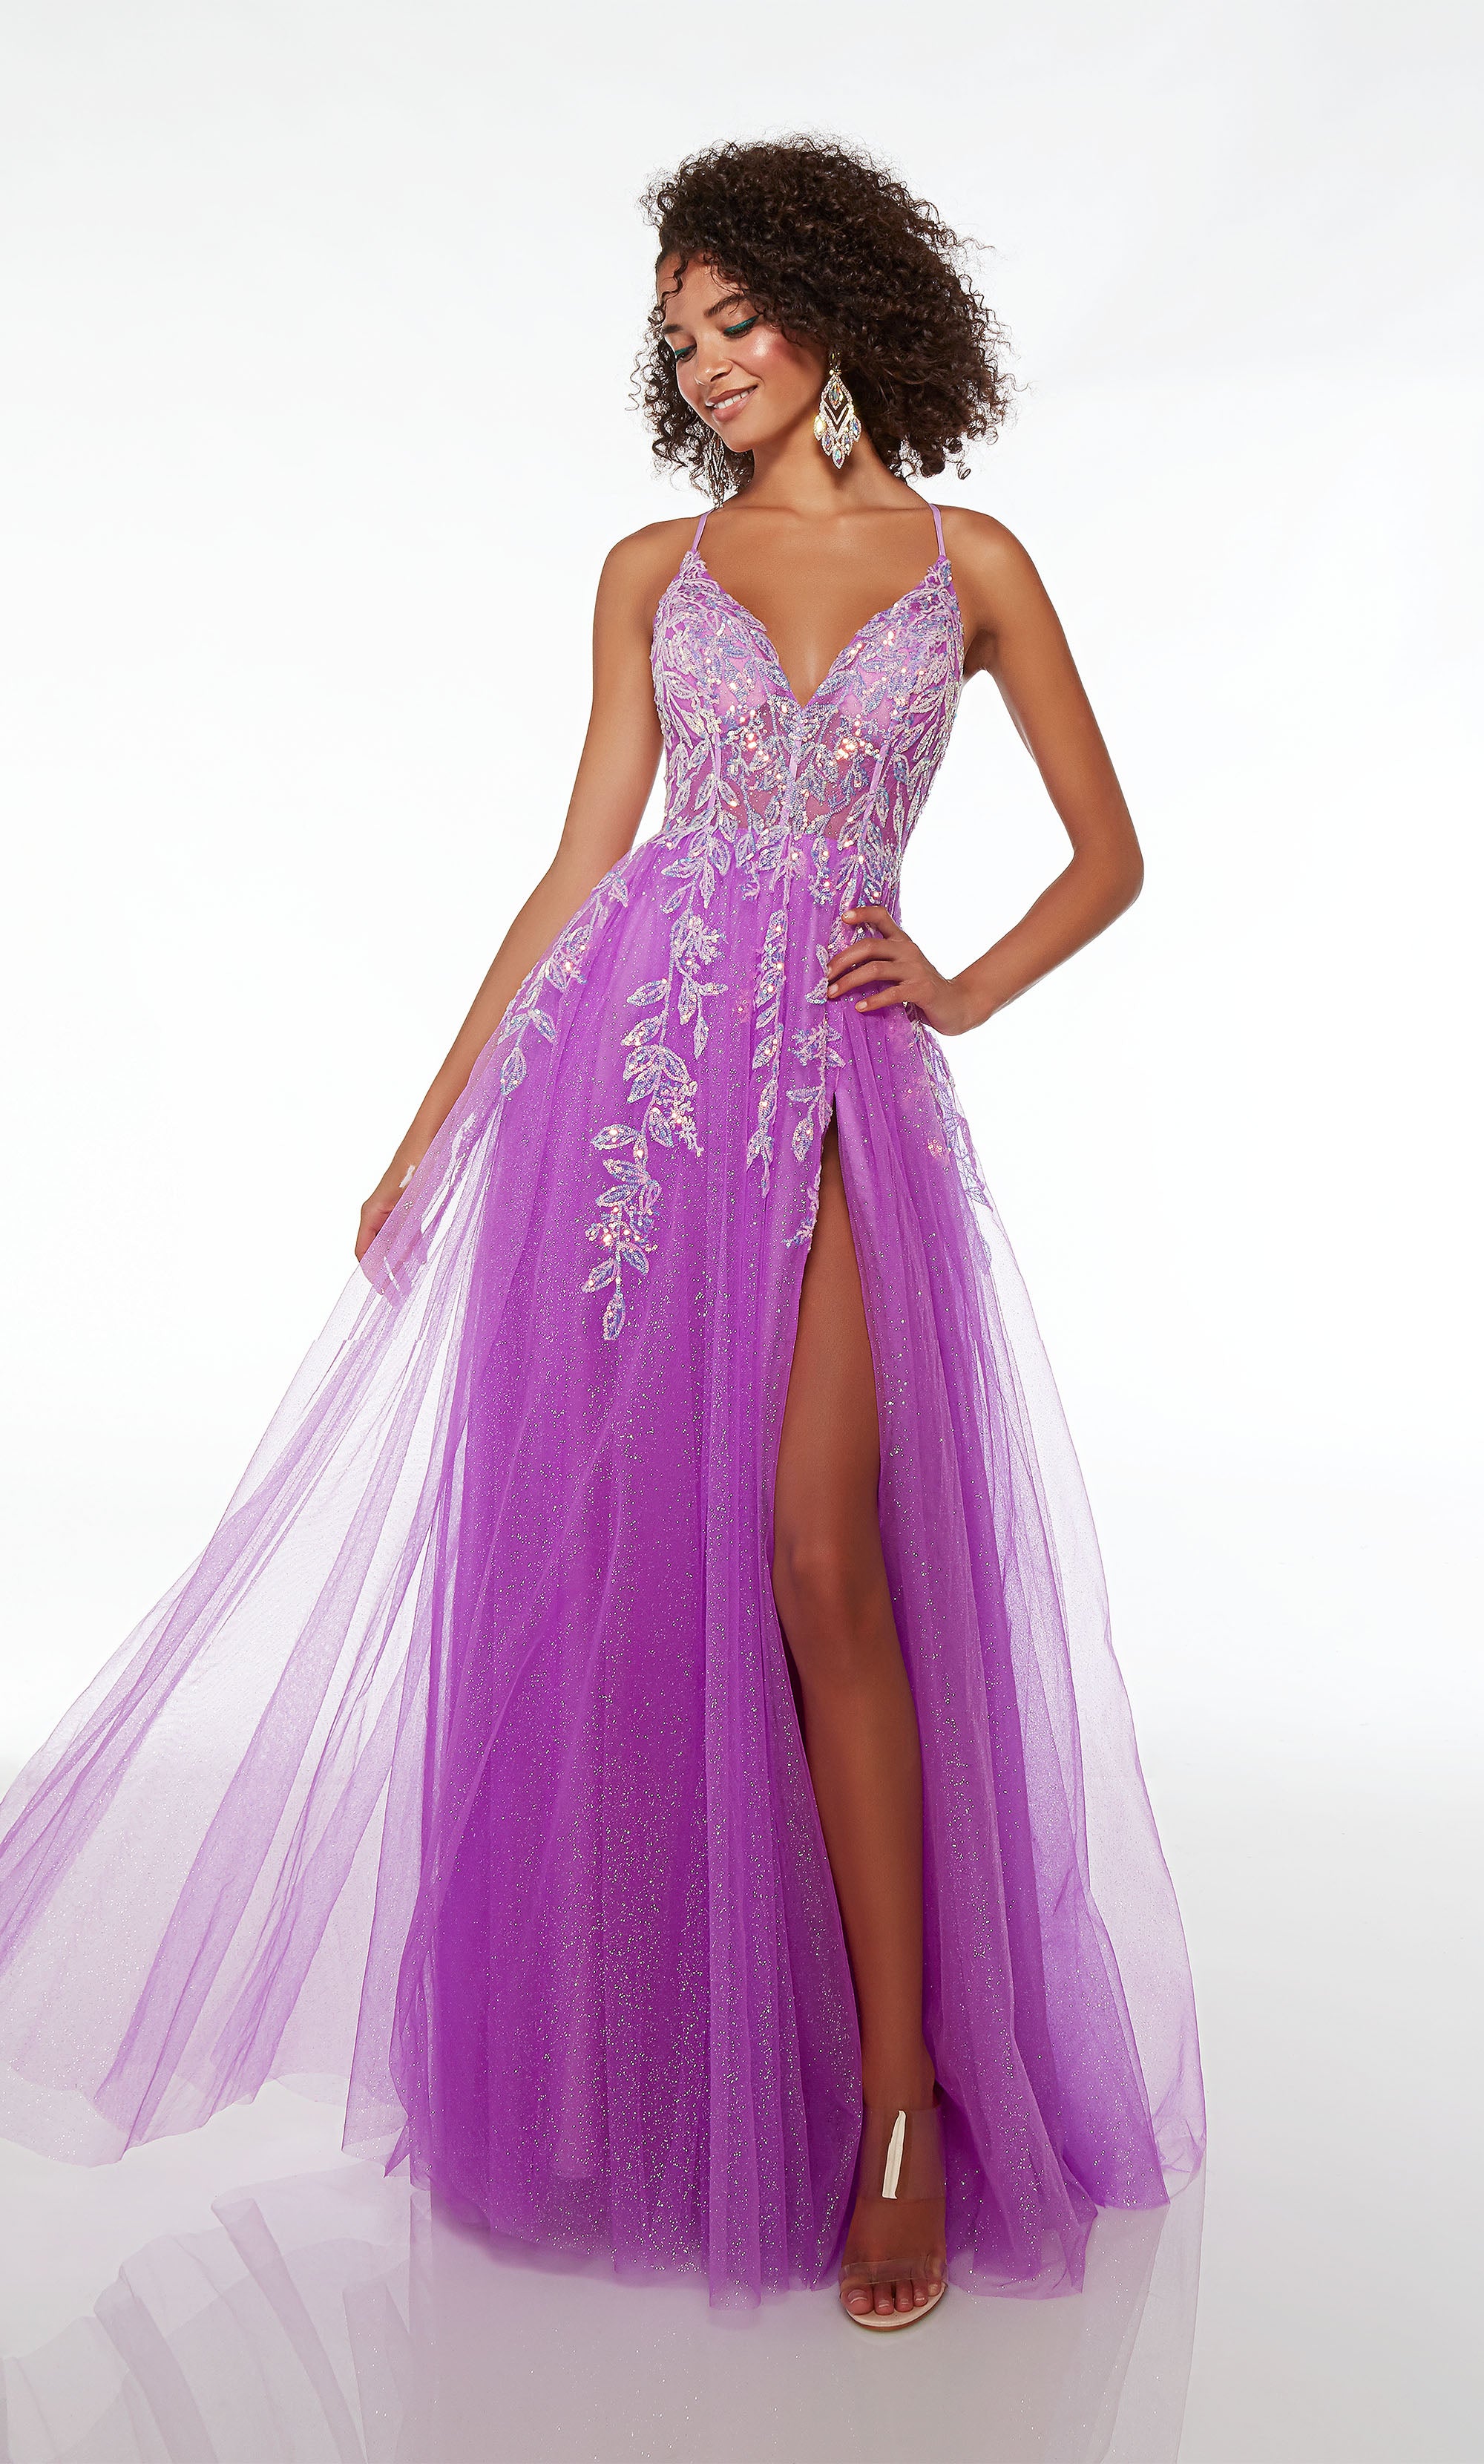 Vintage Mauve Satin, Lace and Sheer Tulle Long Prom Dress